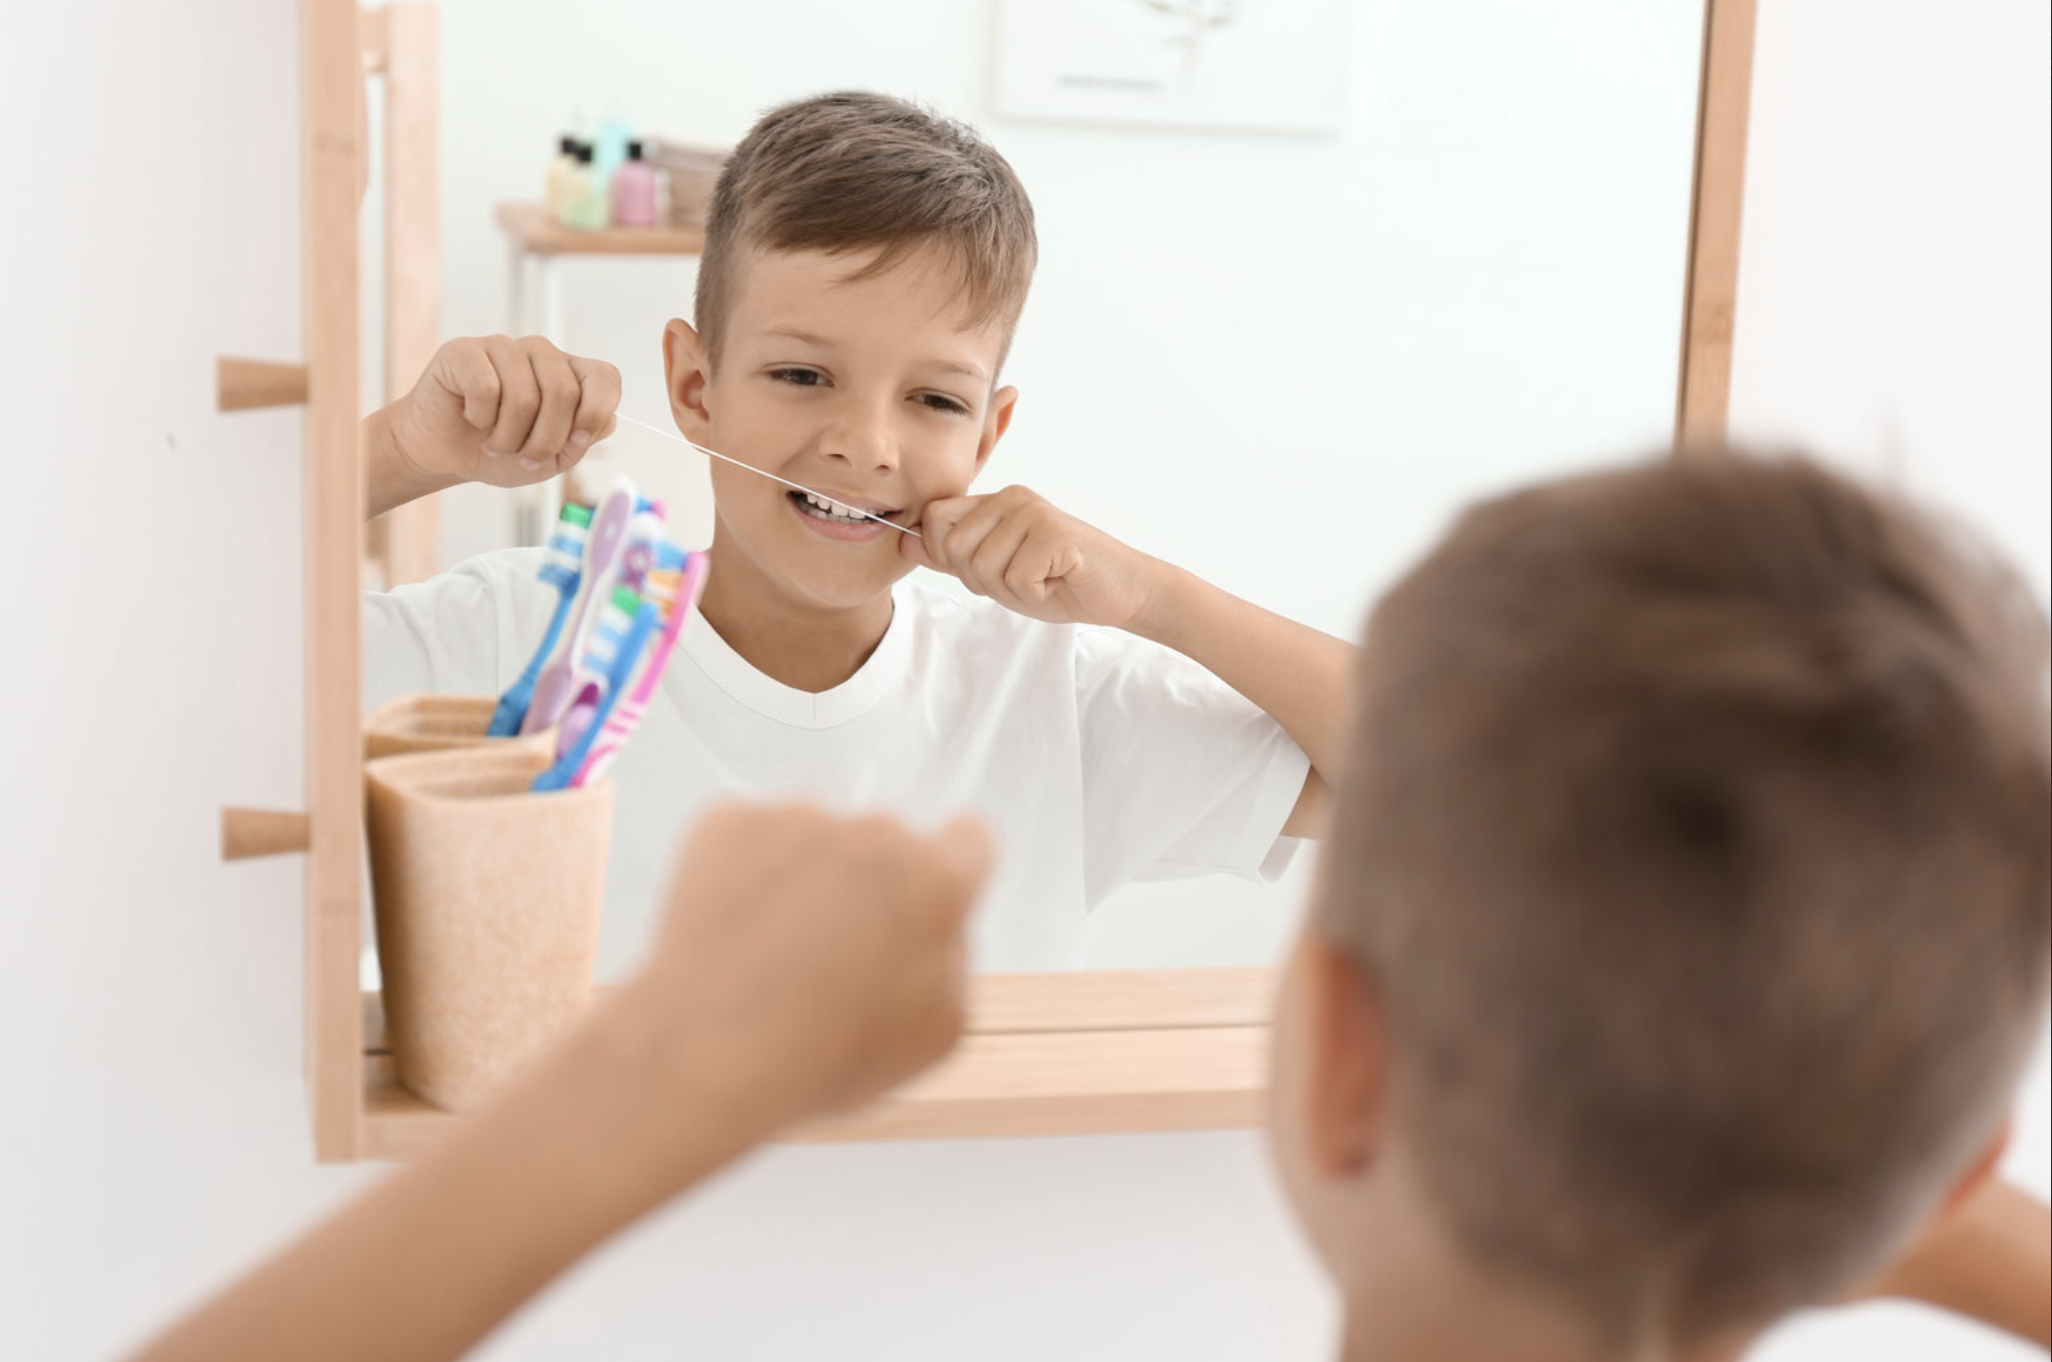 A Parent's Guide to Proper Flossing